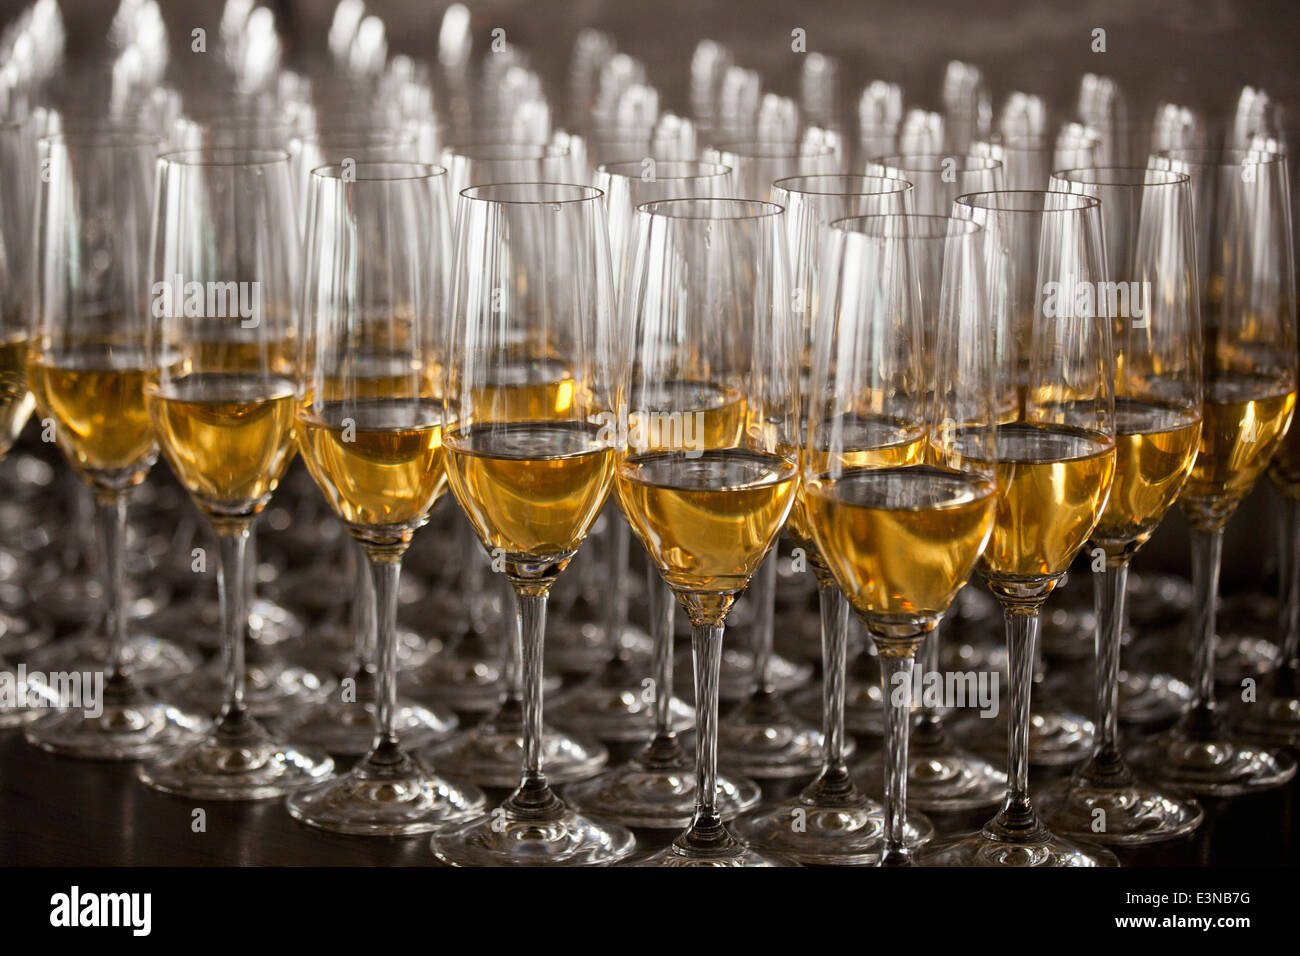 Glasses of white wine arranged on table Stock Photo